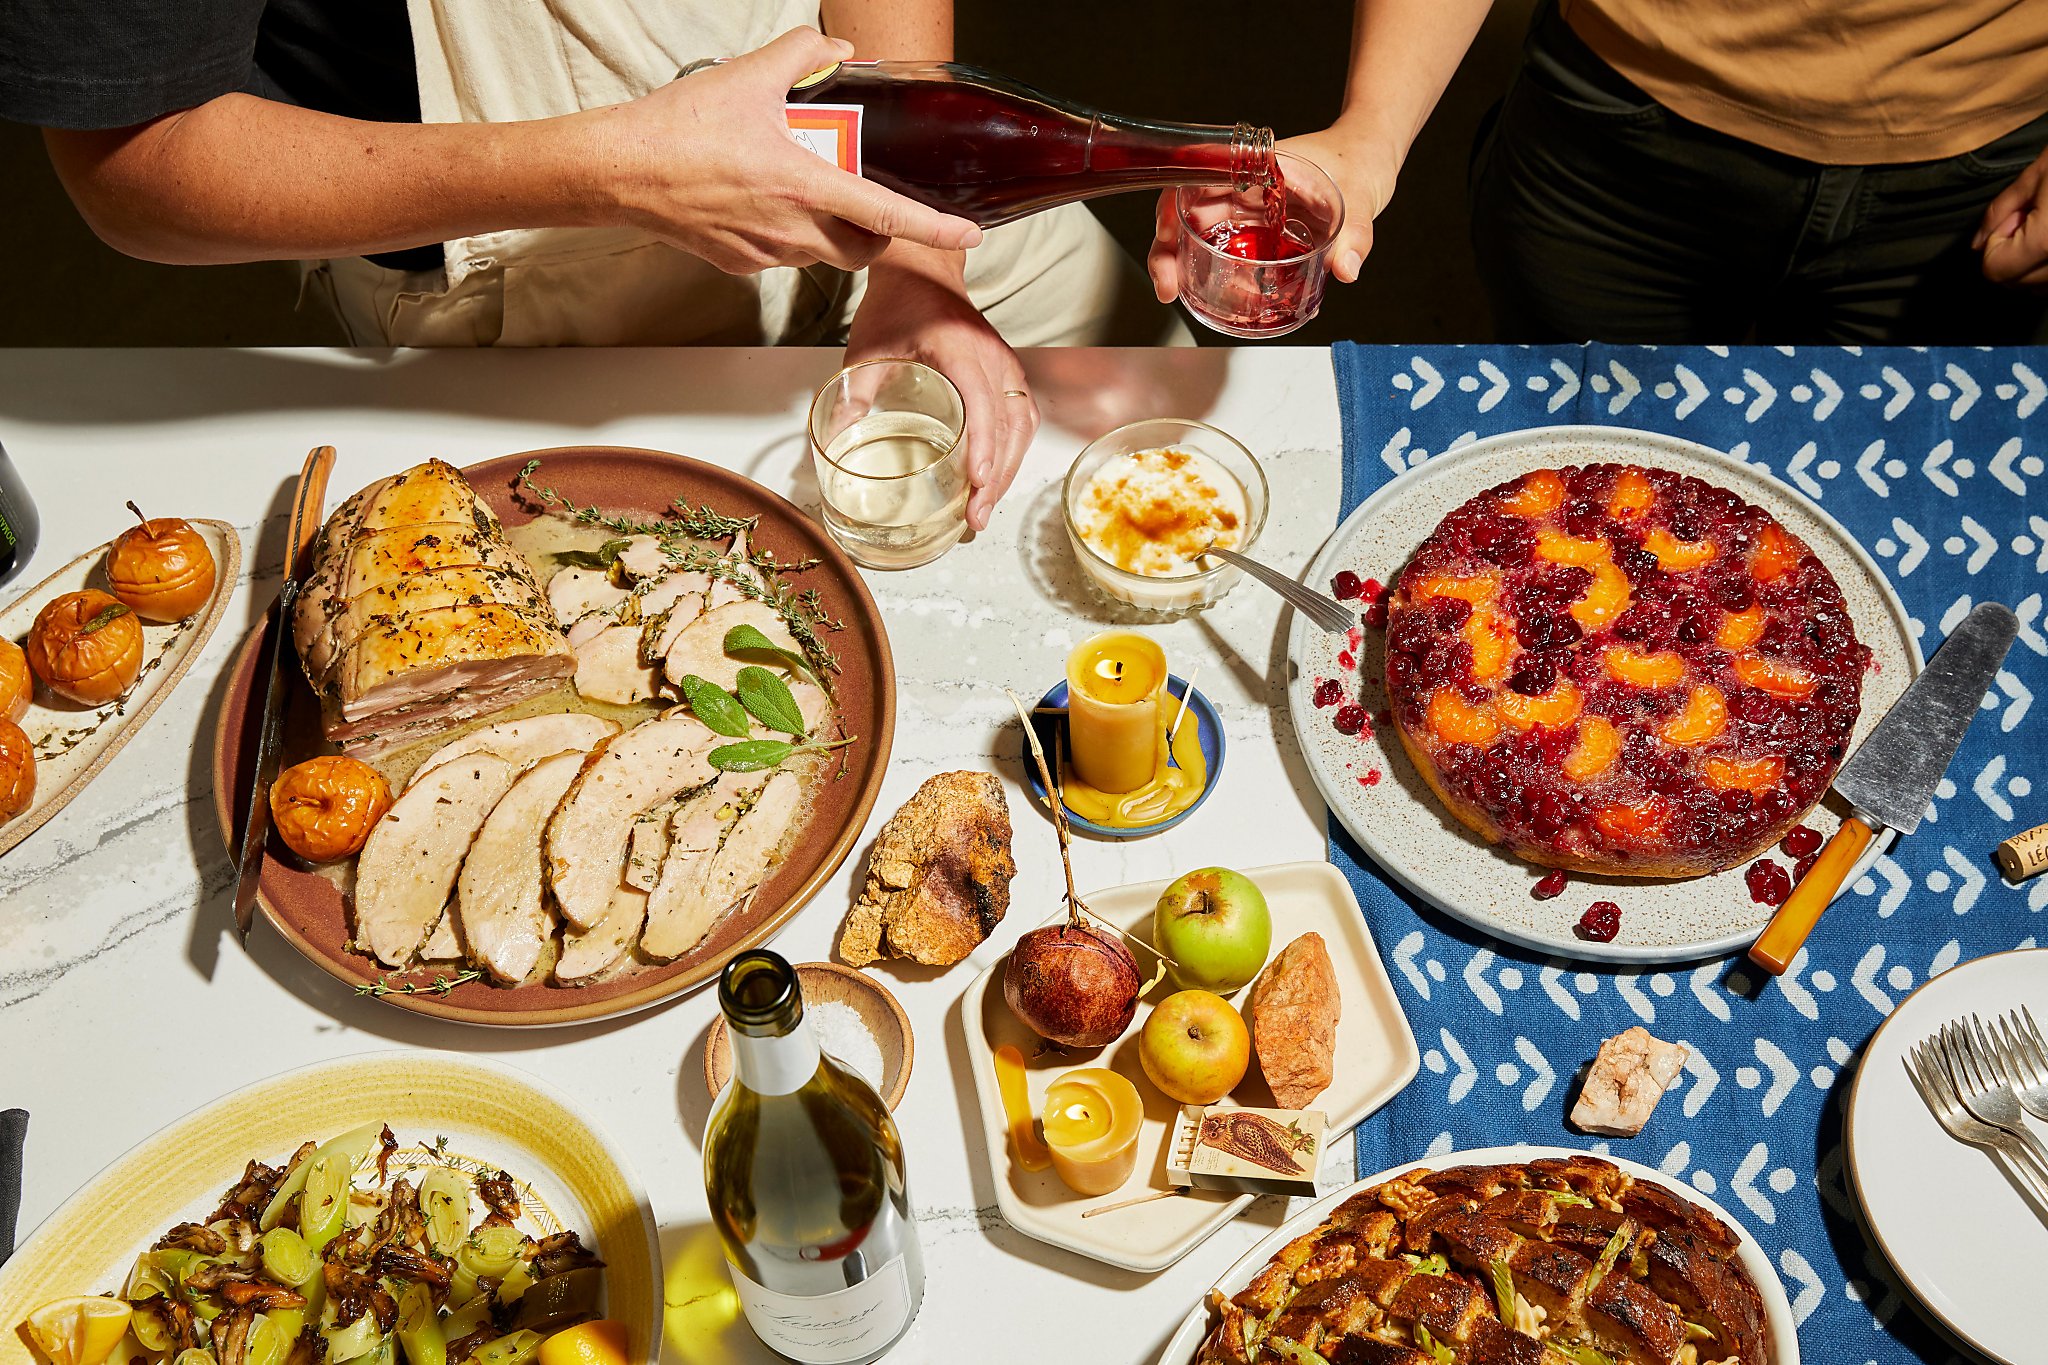 Traditional Thanksgiving is canceled. But you can still have a smaller